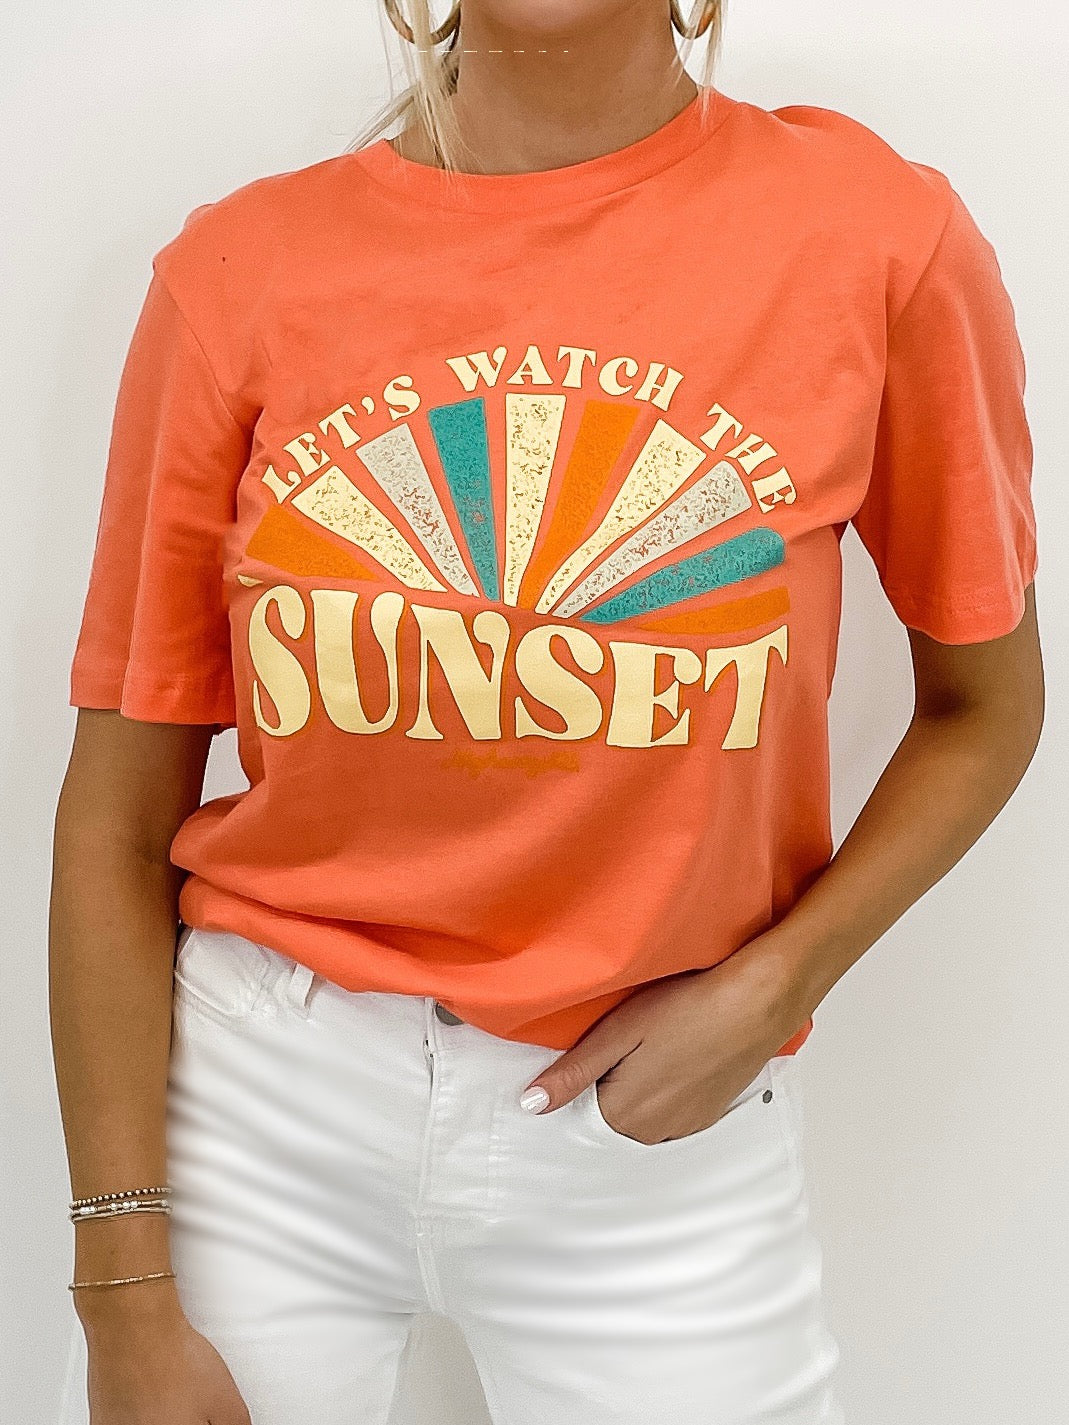 Let's Watch the Sunset Tee